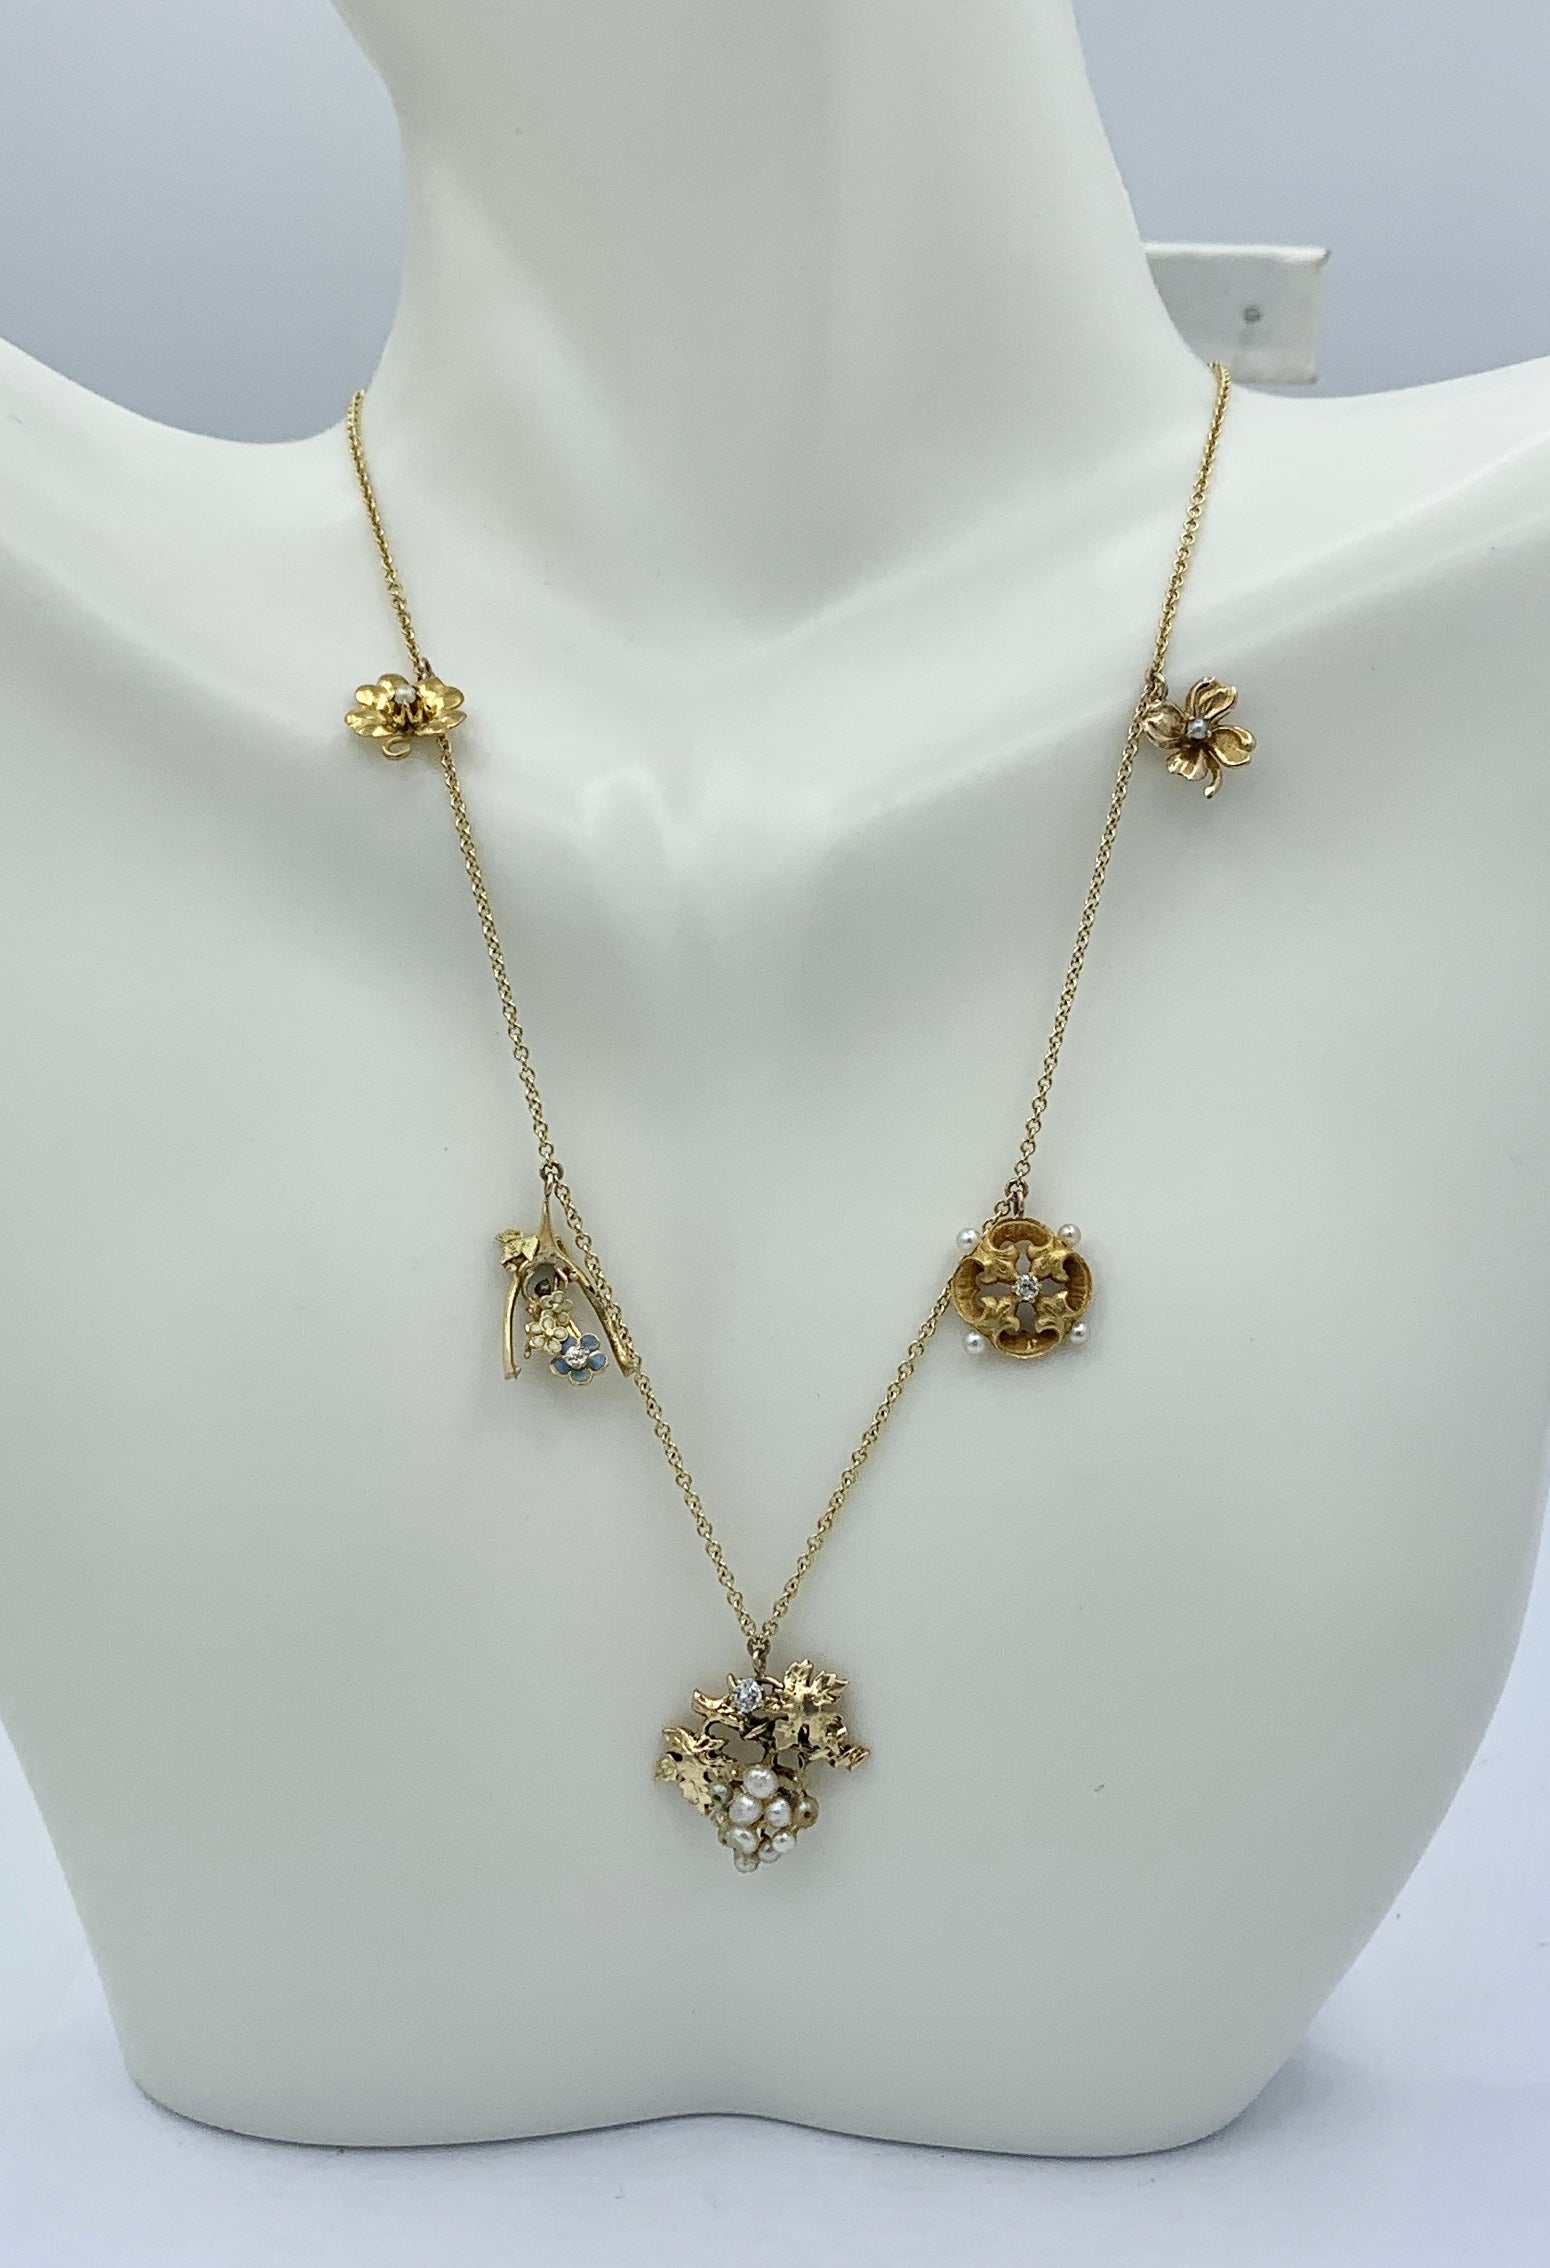 This is an absolutely gorgeous Victorian - Edwardian Flower Charm Necklace with Flowers adorned with Diamonds, Pearls, and Enamel.  The delicate romantic necklace is a reflection of the Victorian's love of flowers, the language of flowers, and